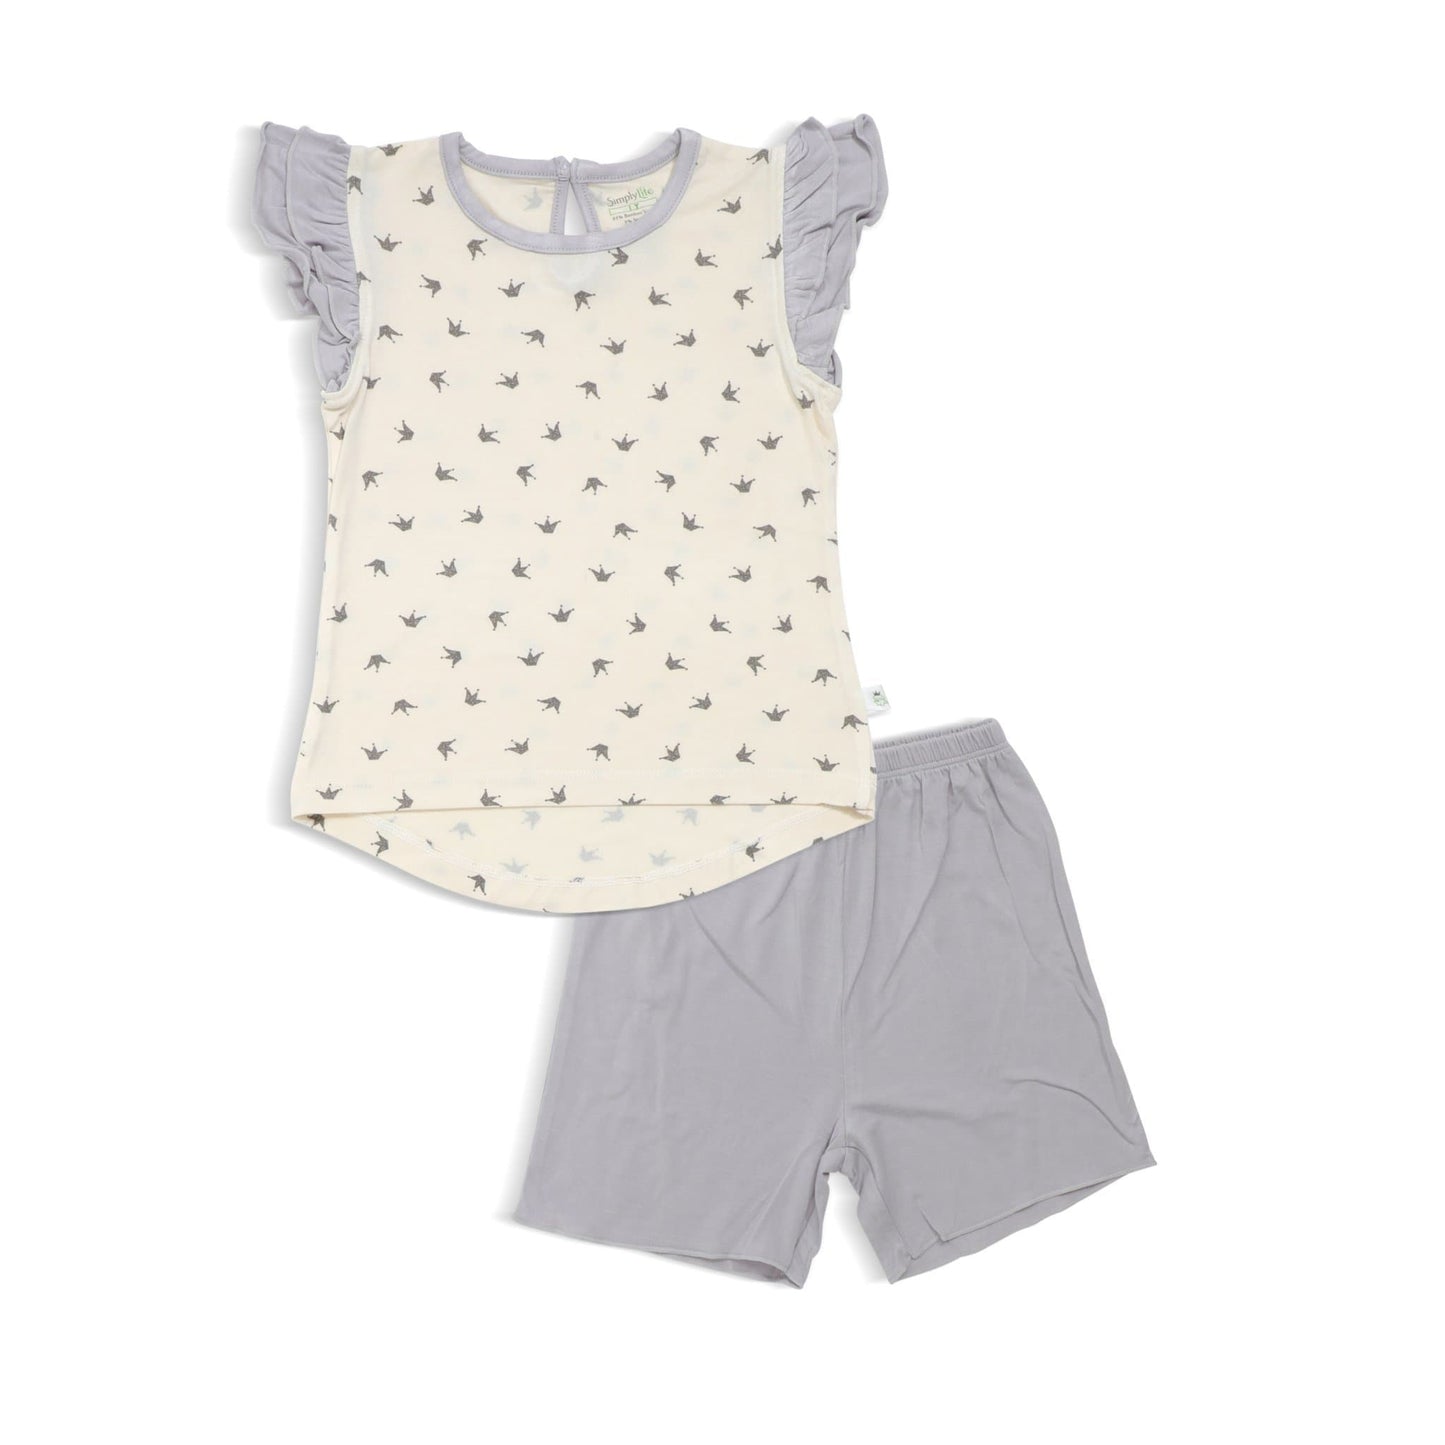 Royale - Shorts & Tee (with cap-sleeved) Set by simplylifebaby